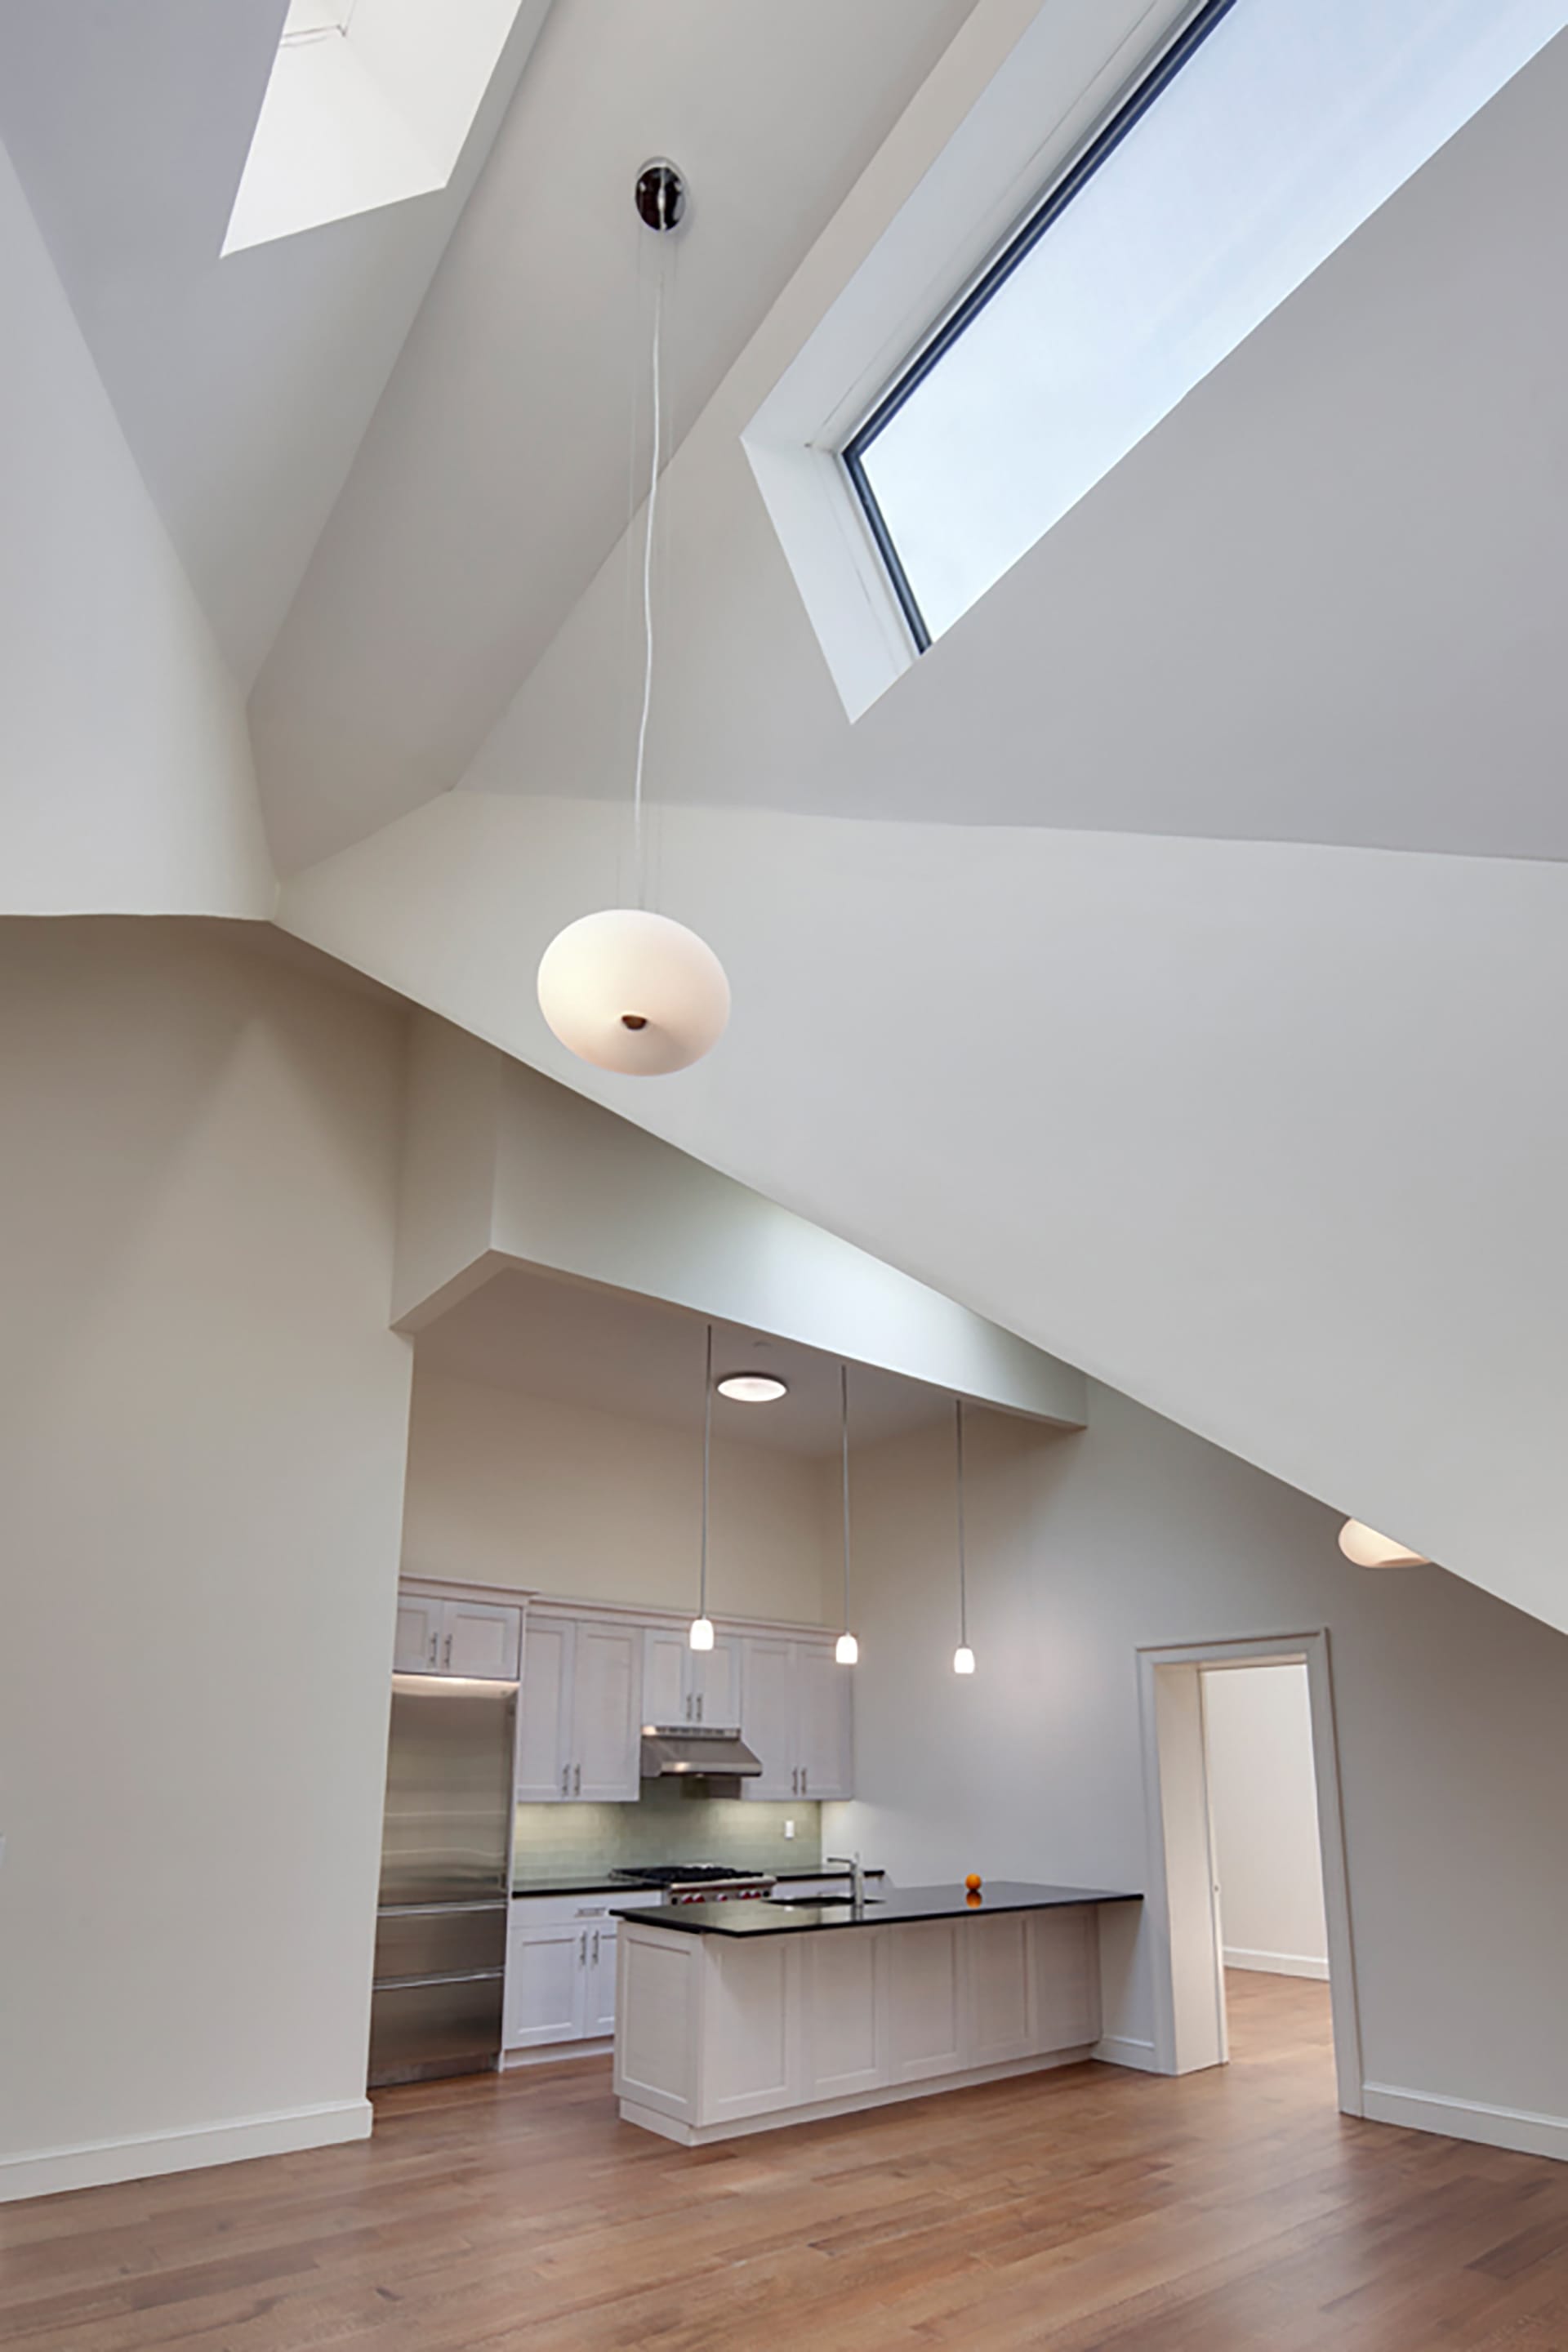 Kitchen with two skylights and very high ceilings in a Brooklyn condo